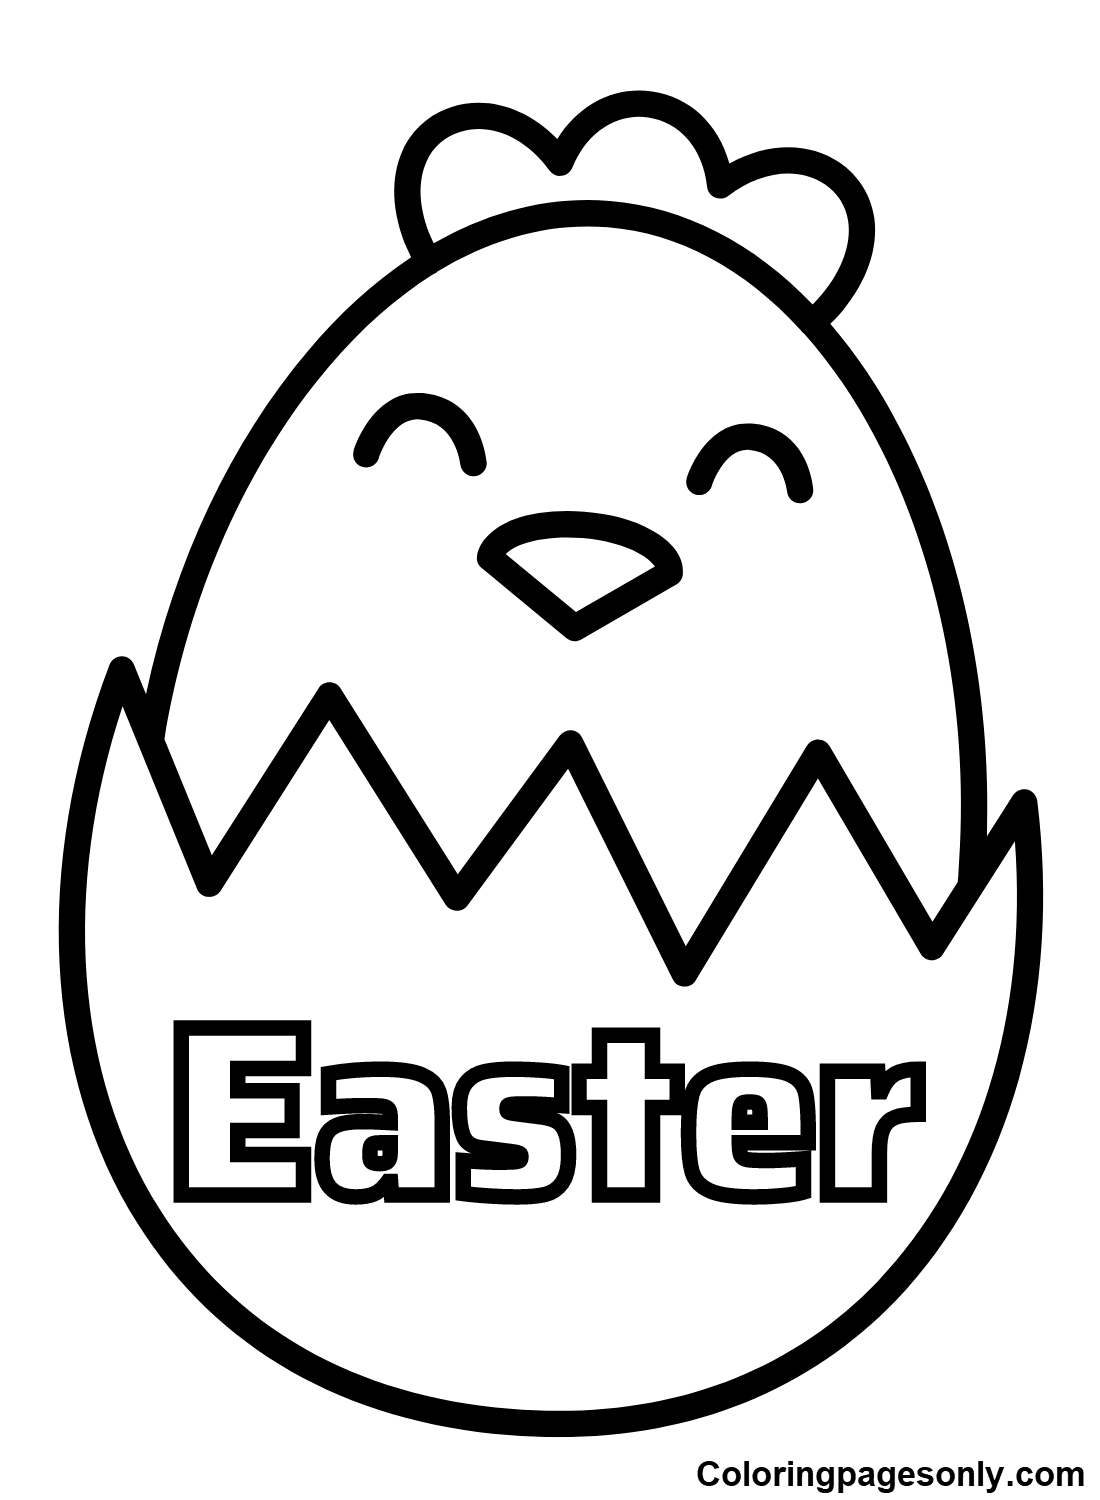 Cute Easter Chick Images Coloring Pages